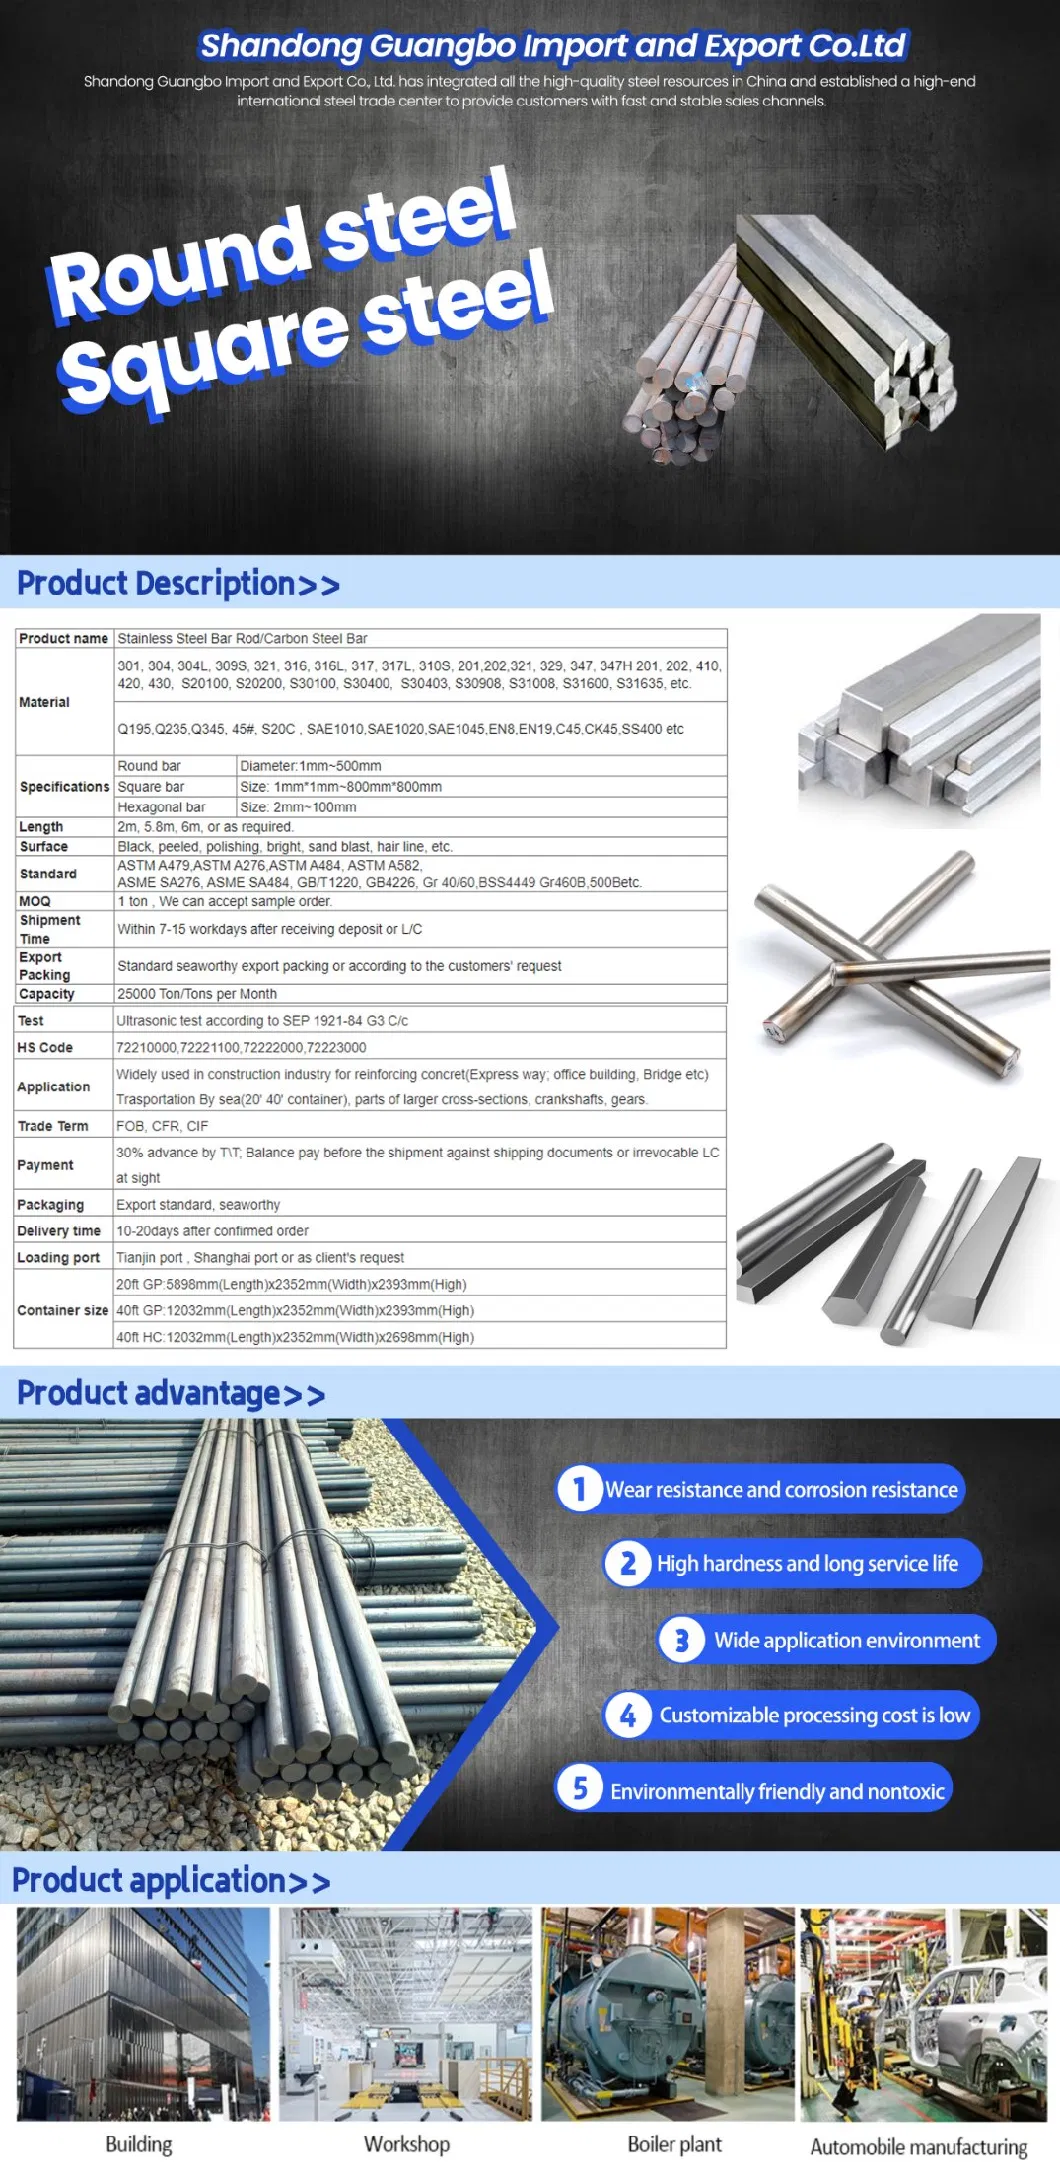 303 Stainless Steel Bar 304f 316L 316f Stainless Steel Round Bar Square Bar Grinding Bar